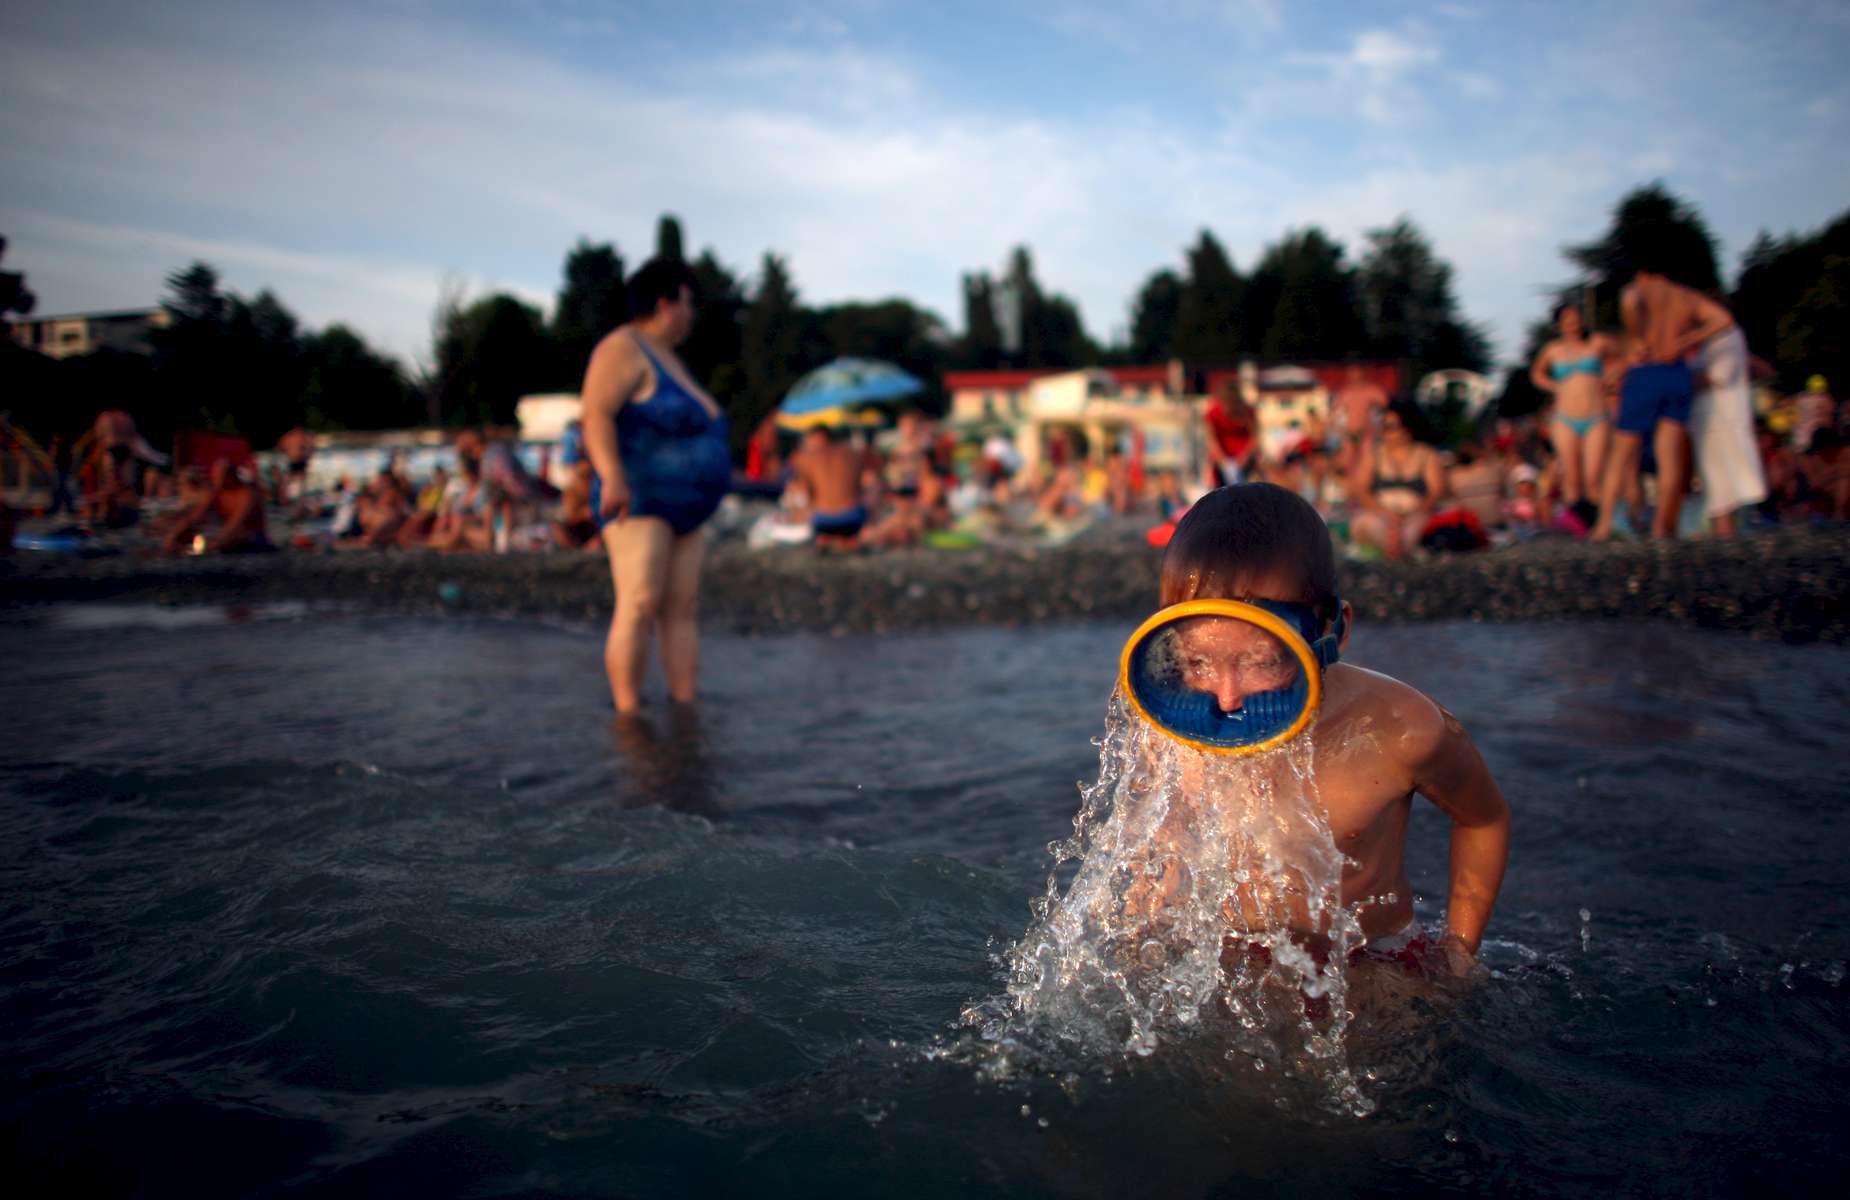 A boy emerges from the water in his scuba diving mask as beach-goers enjoy the warm weather on Thursday, August 14, 2008, at the Black Sea resort Sochi, Russia. The government has pledged to invest $12 billion to transform the Soviet-era resort town into a Mediterranean-style retreat.   As the mountainous Black Sea resort Sochi, Russia, prepares for the Winter Olympic games scheduled there for 2014, it emerges as a place replete with contradictions -- glitzy clubs and impoverished street vendors, progress and repression, Westernization and former Eastern bloc ideologies. 